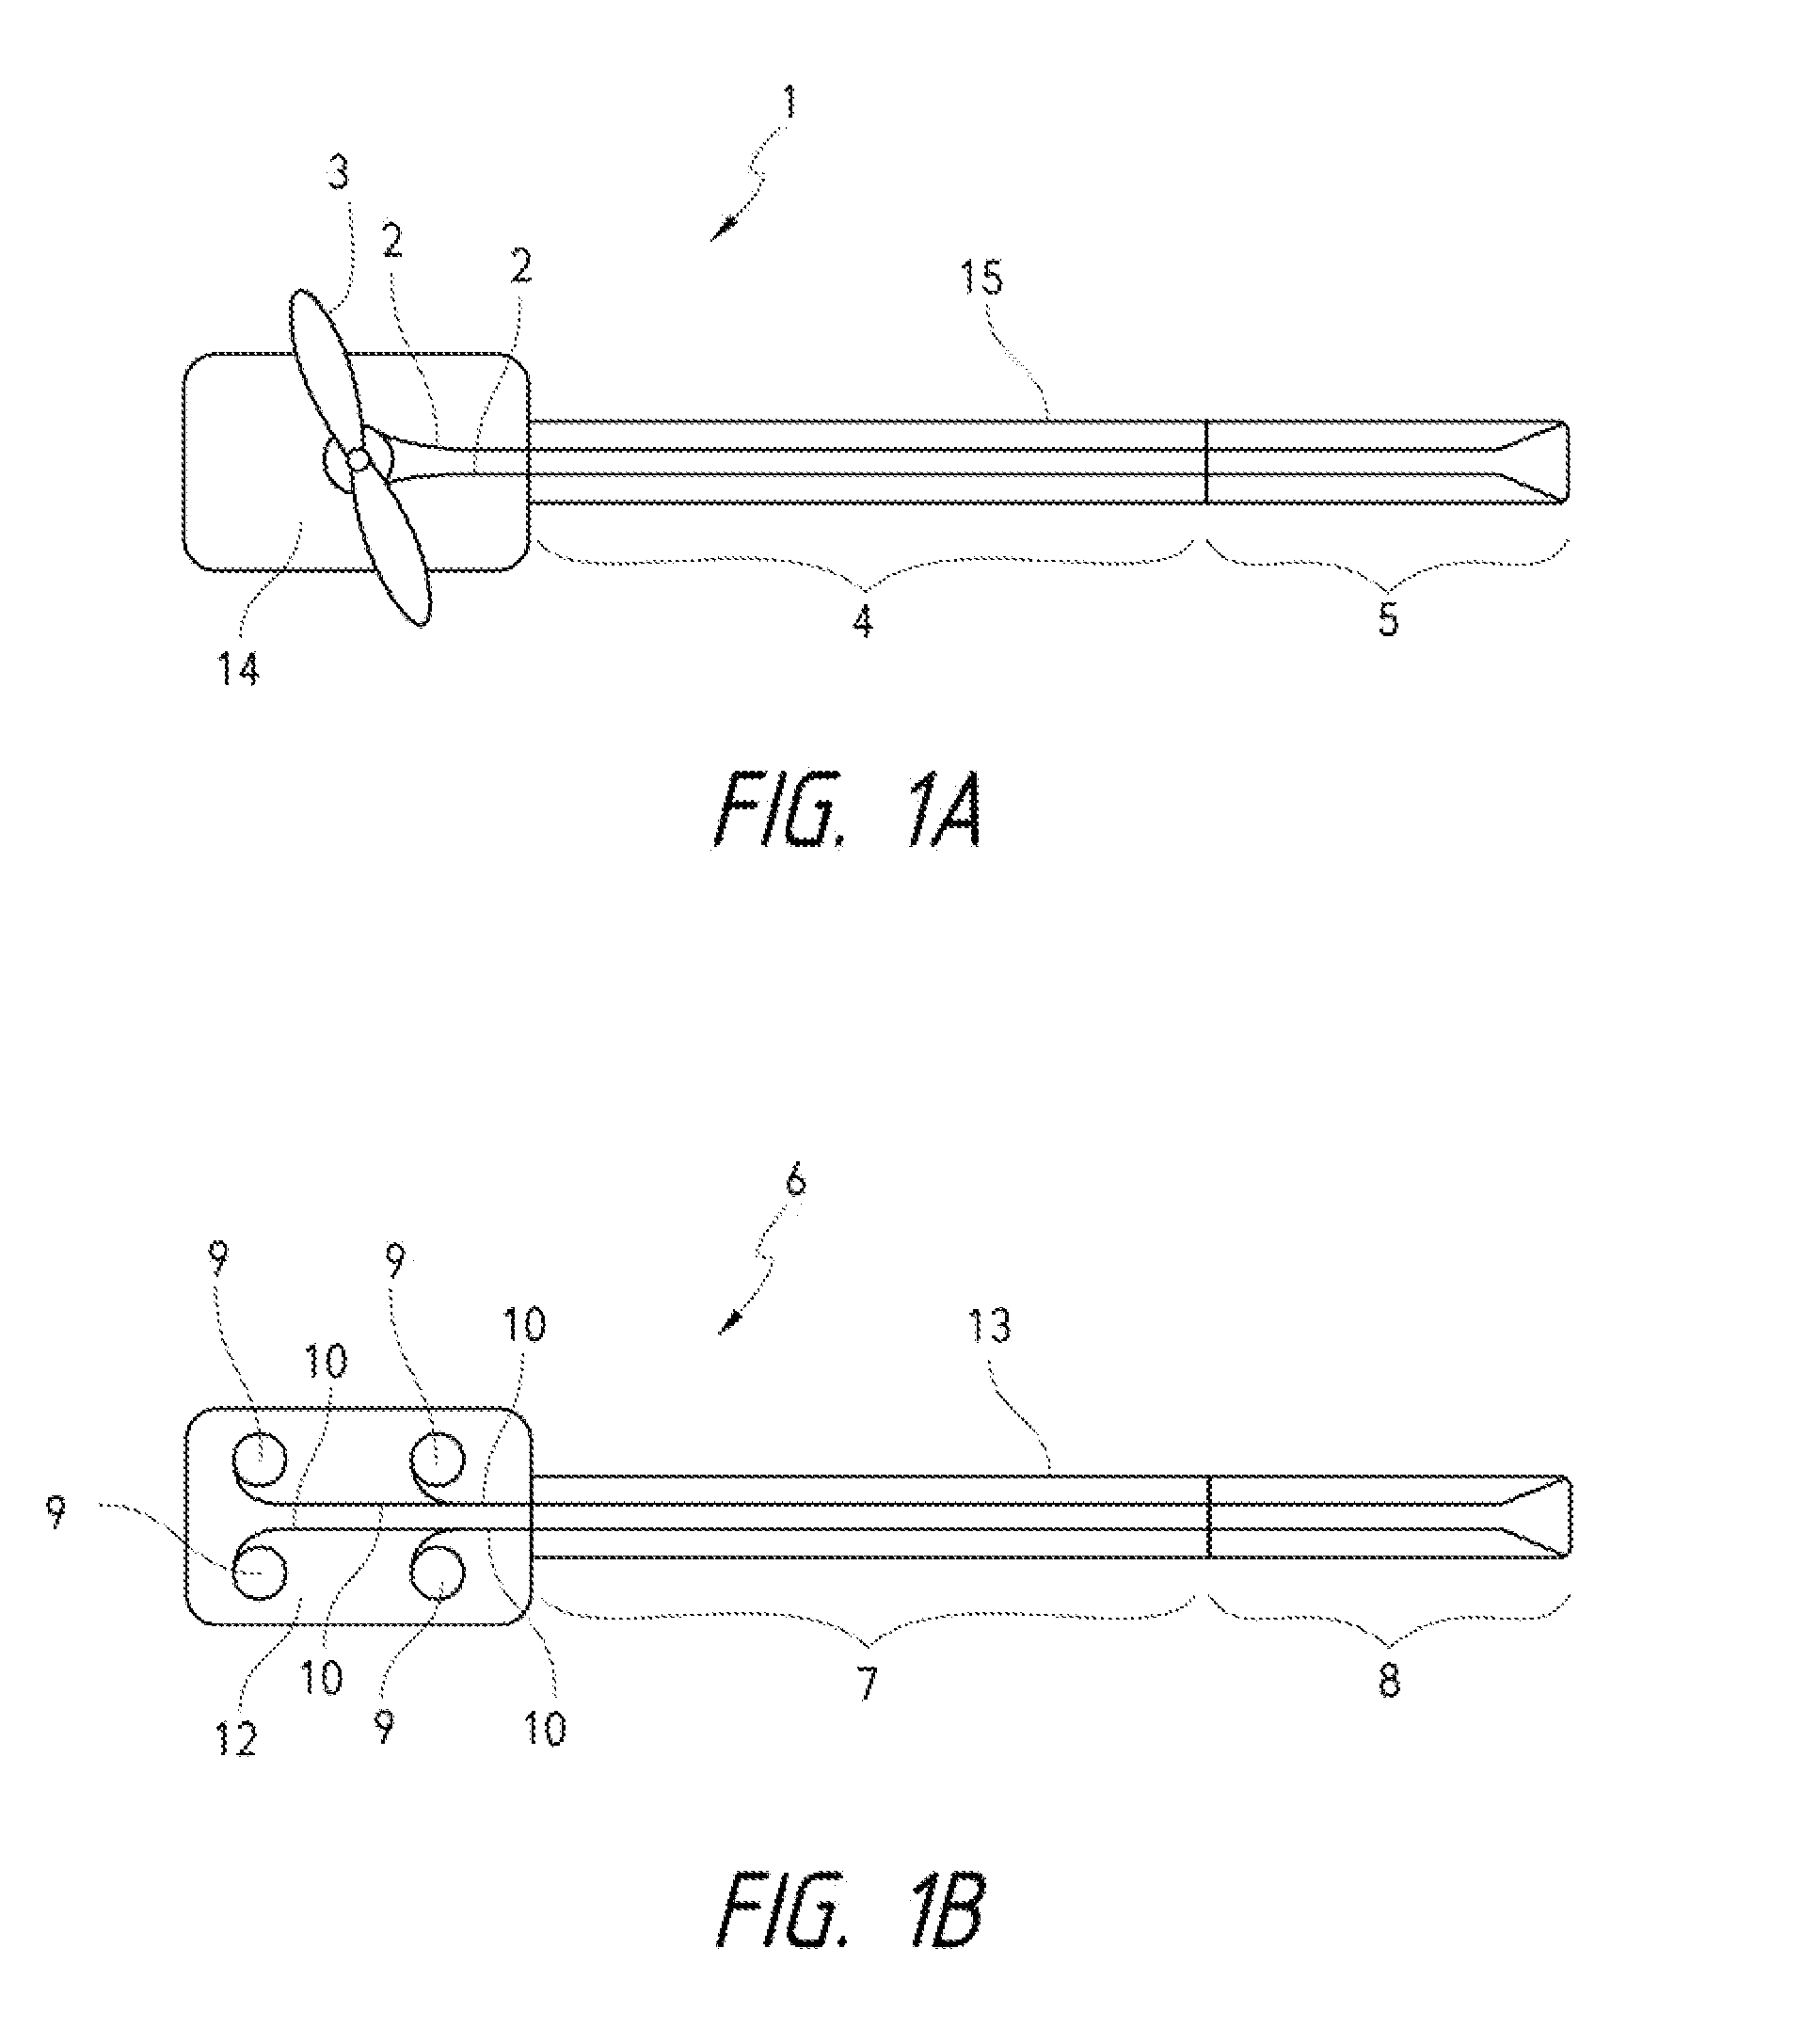 Apparatus and methods for fiber integration and registration